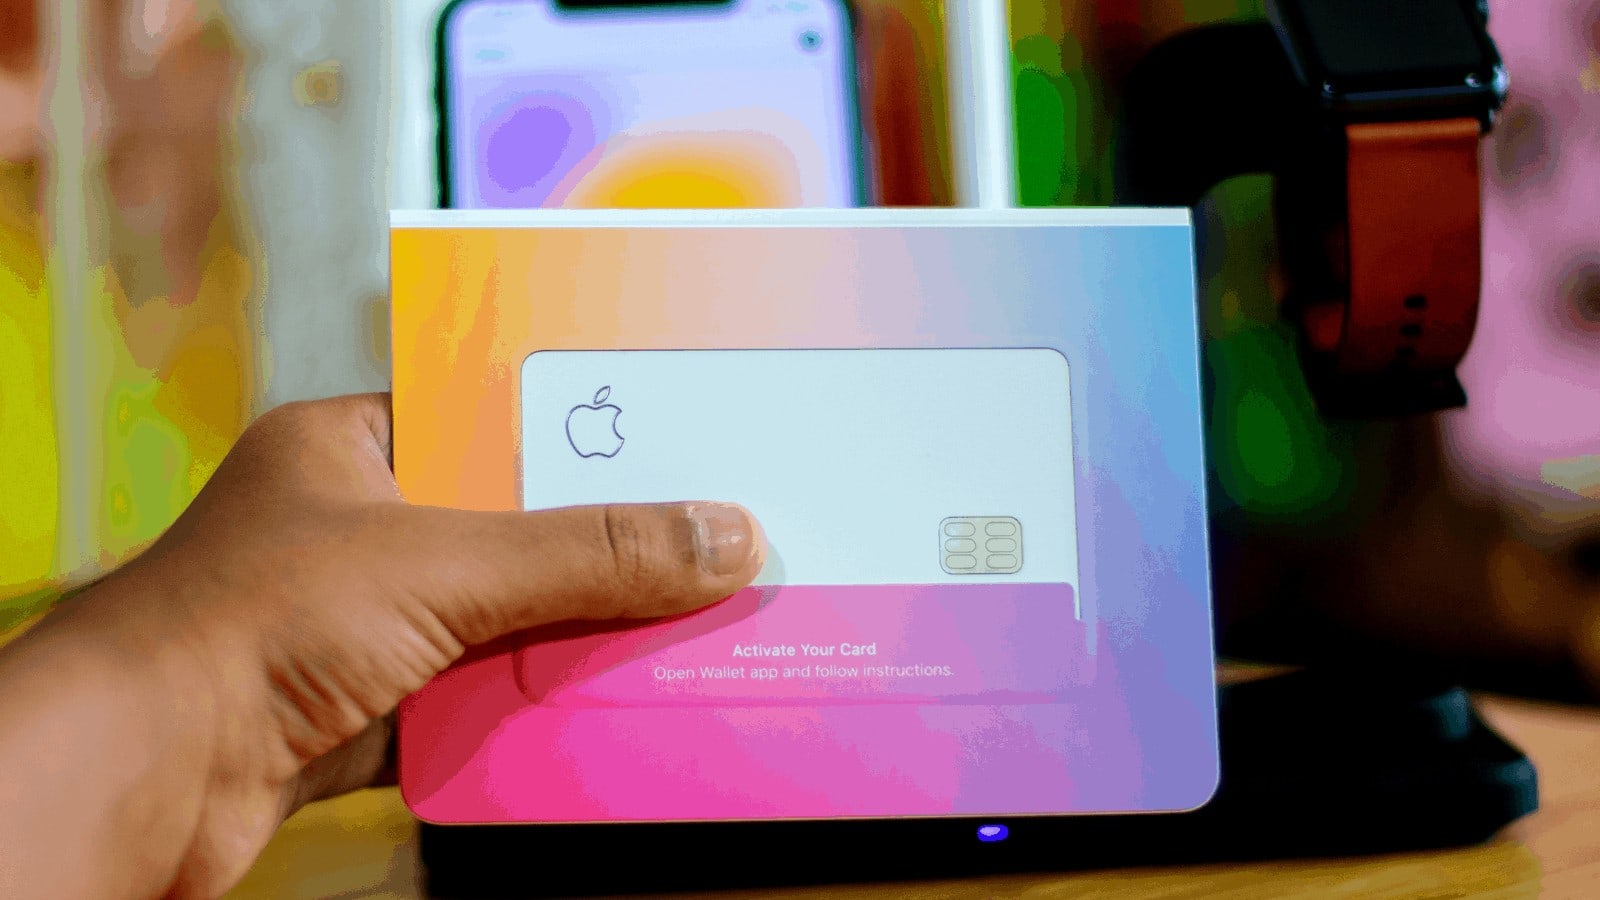 A person showing off an Apple Card, ensuring privacy and caution in the adult industry.